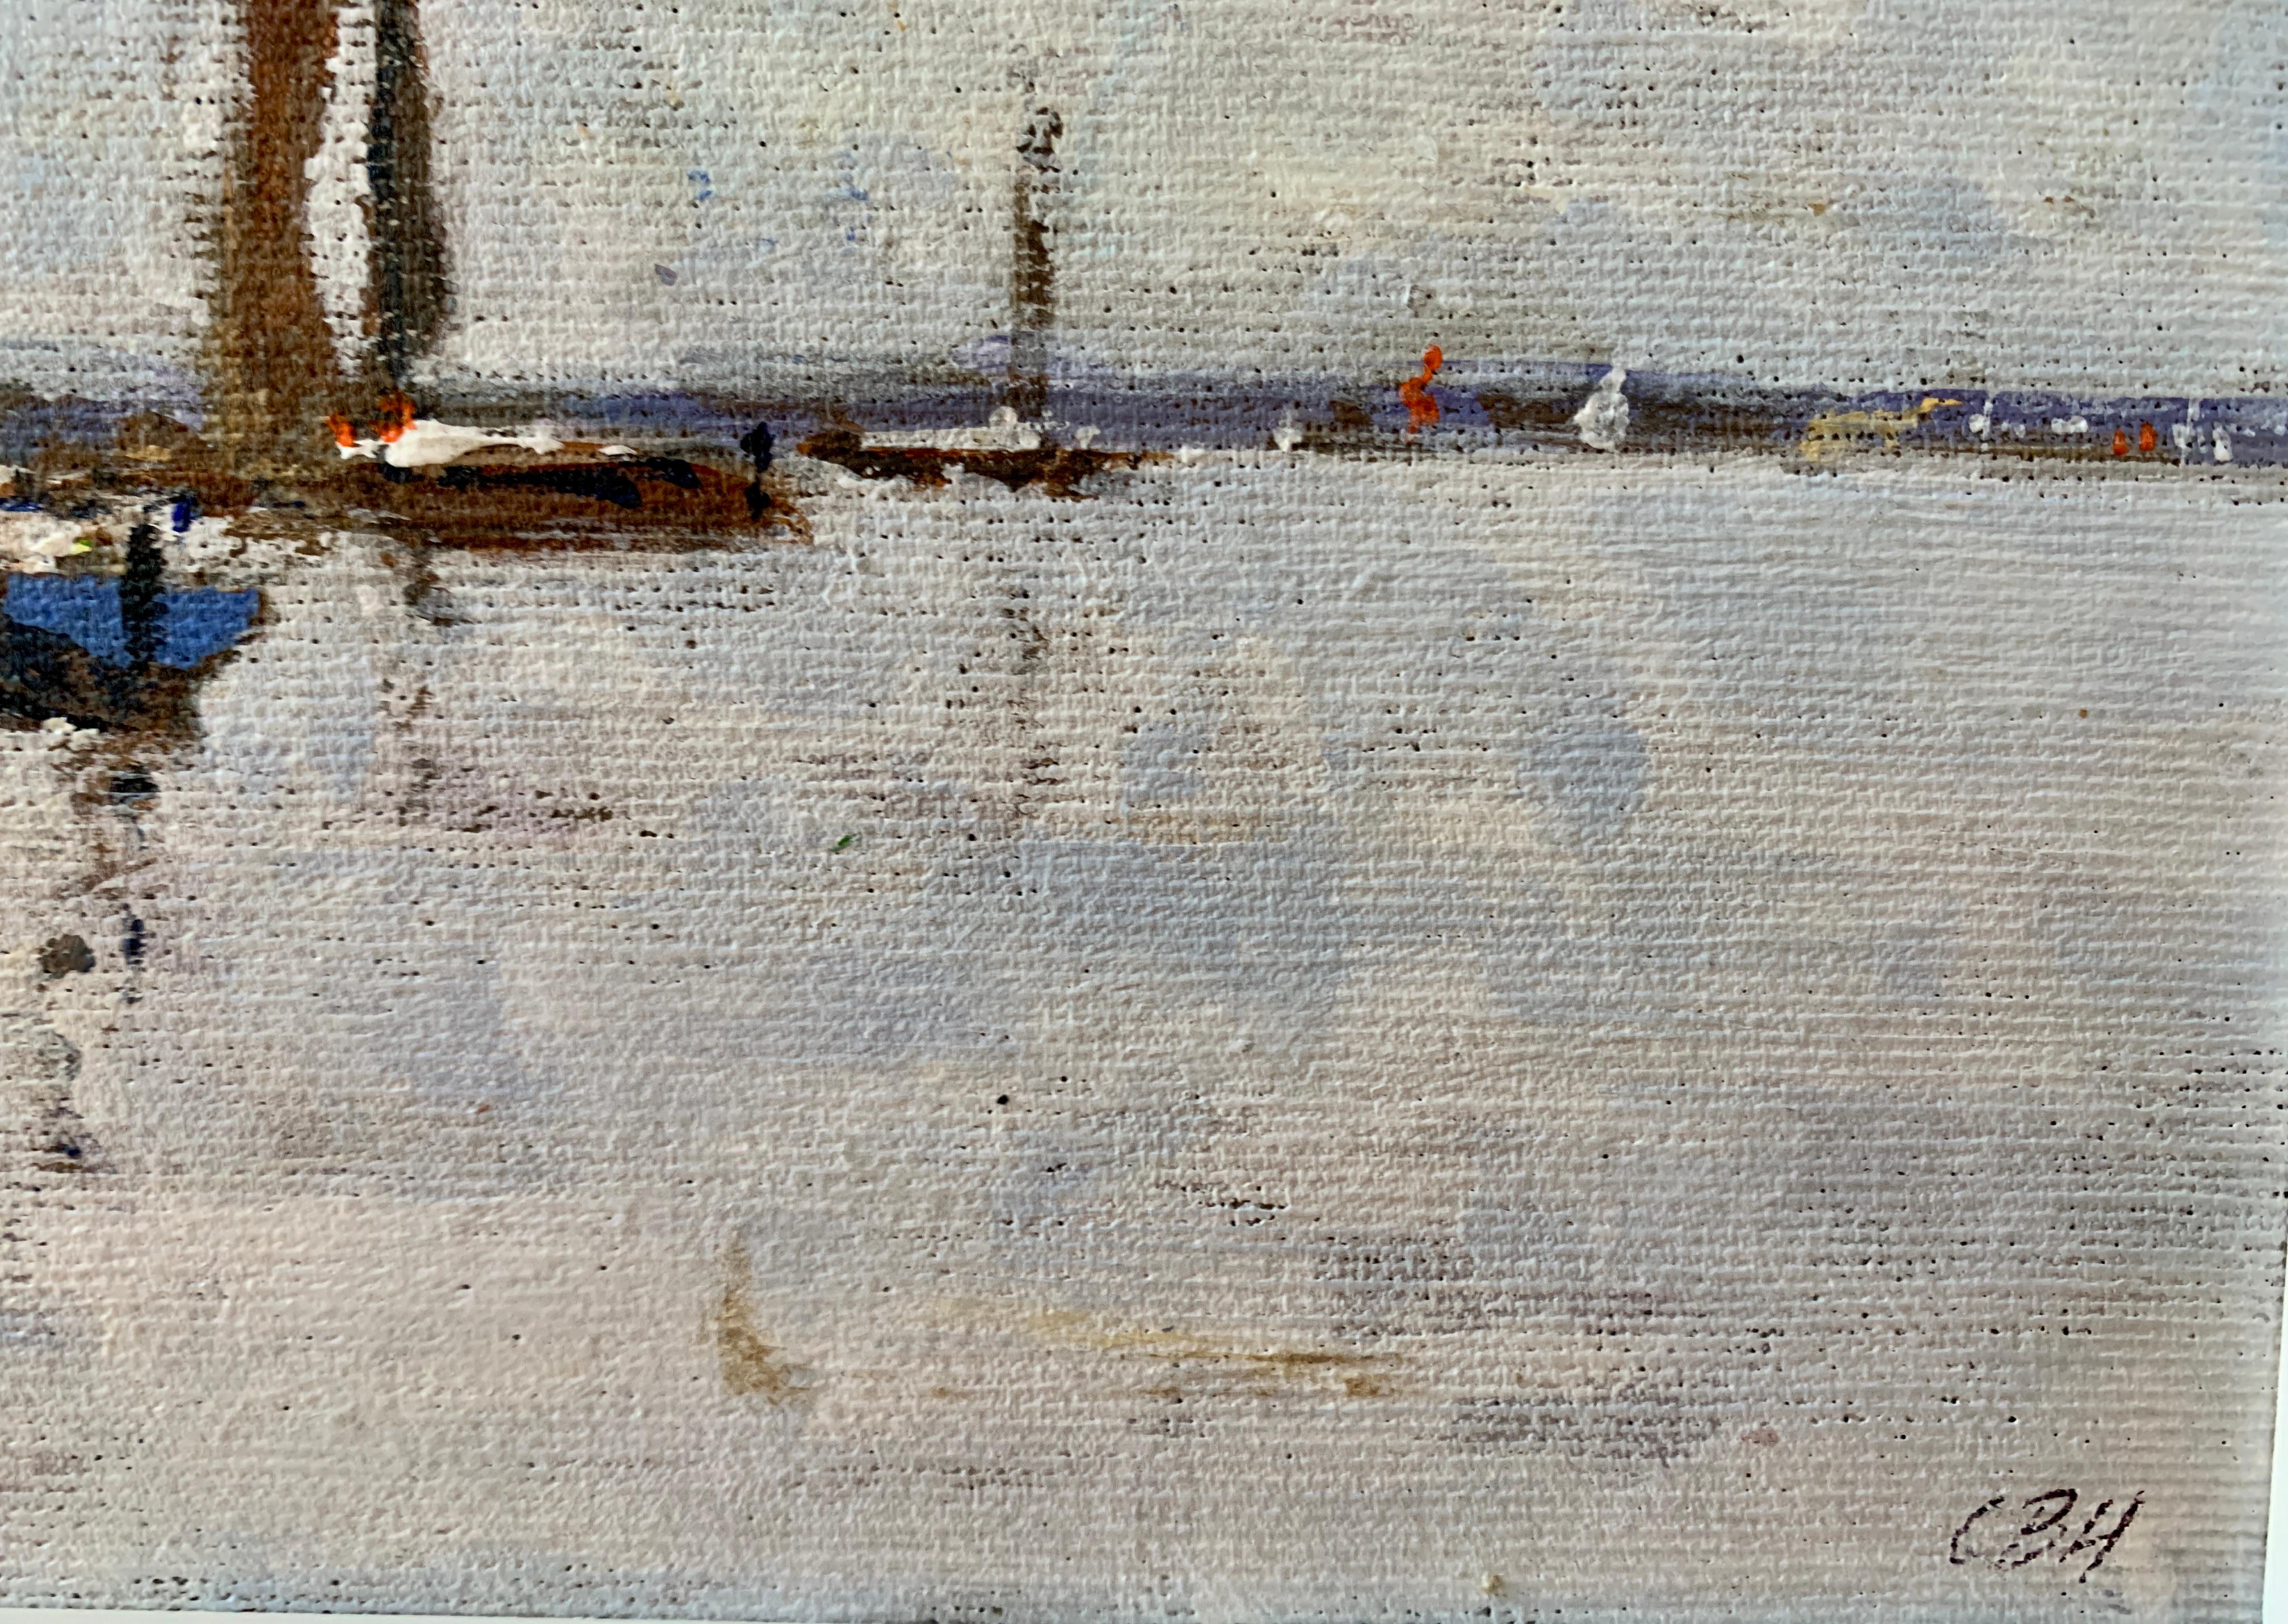 American Impressionist sketch of an American Yacht moored in a harbor ,CT or MA

Charles Bertie Hall painted scenes all over England, Europe, and America in a traditional Impressionist manner. He exhibited in London and various States in America.

